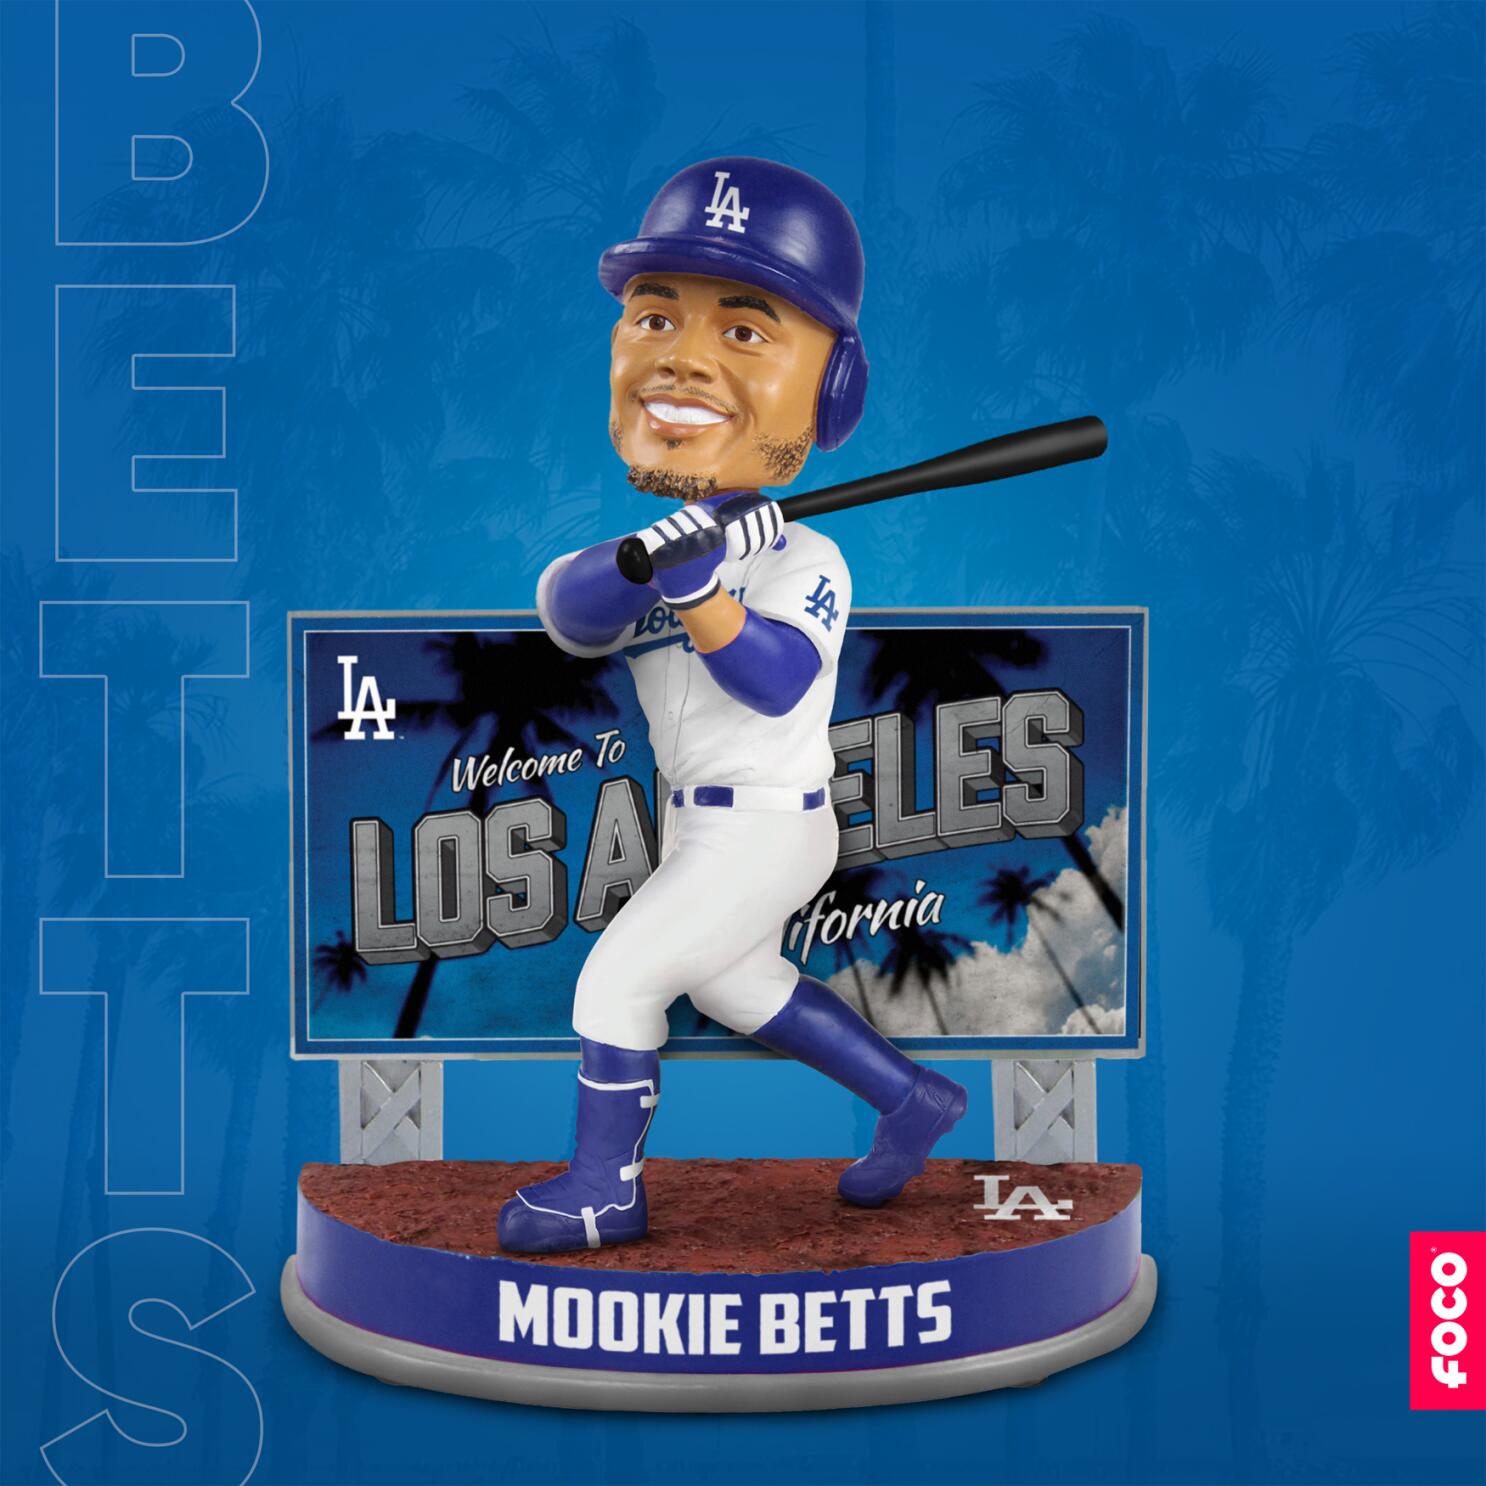 Here's a look at the first Mookie Betts Dodgers bobblehead - Los